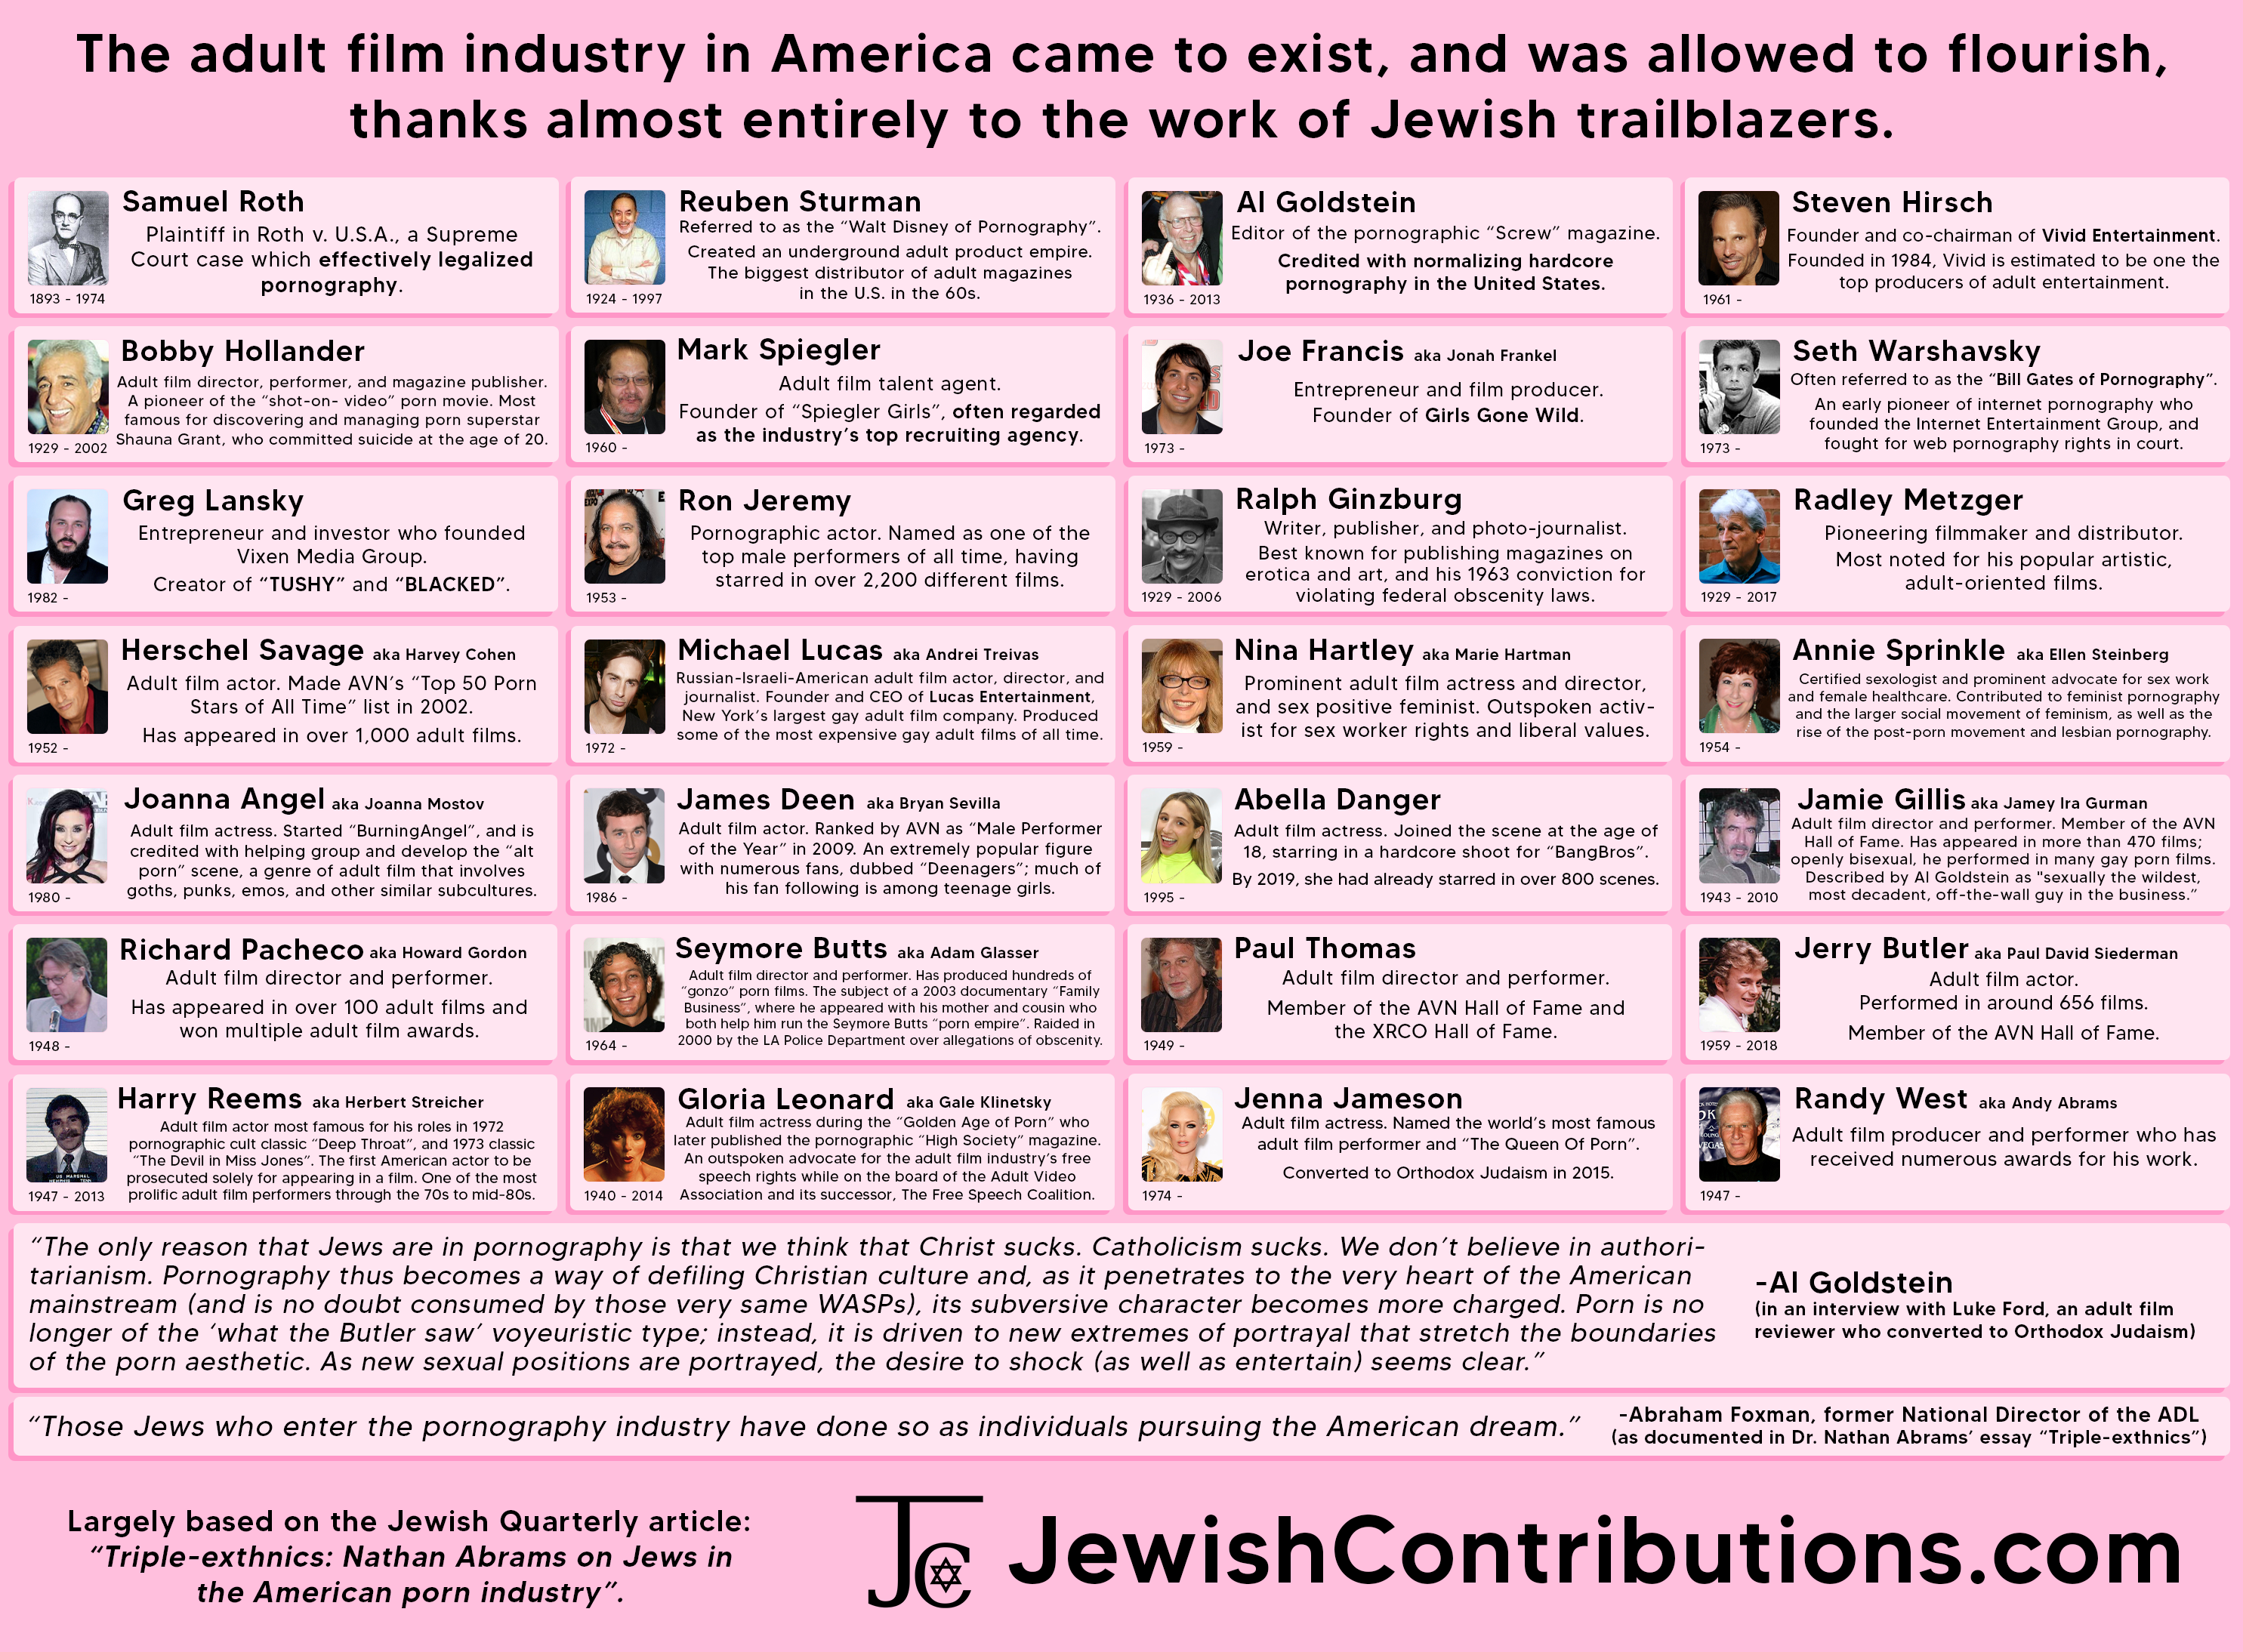 The adult film industry in America came to exist, and was allowed to flourish, thanks almost entirely to the work of Jewish trailblazers.